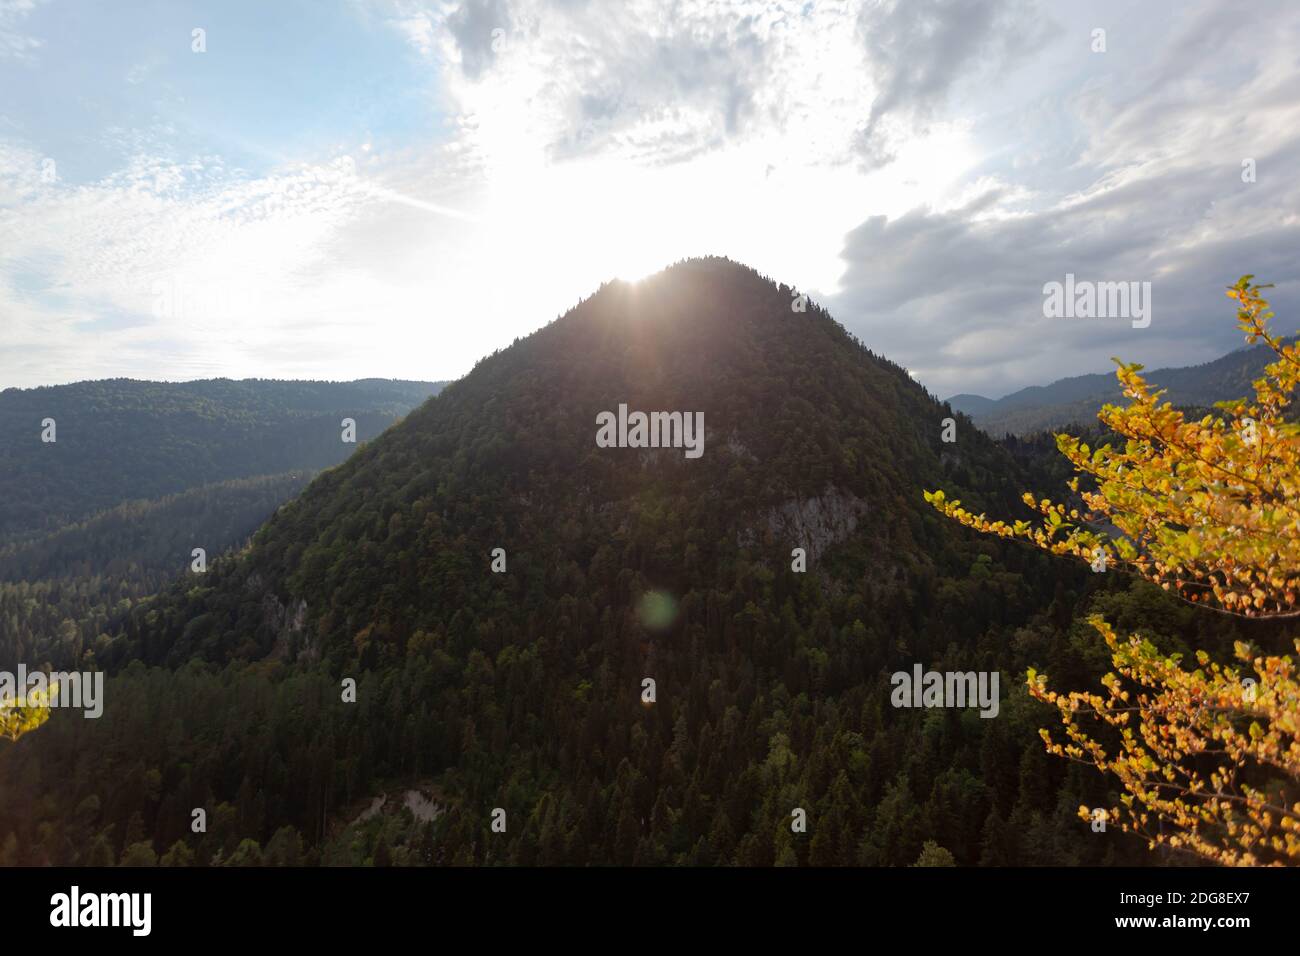 High mountain with spruces against the sky Stock Photo